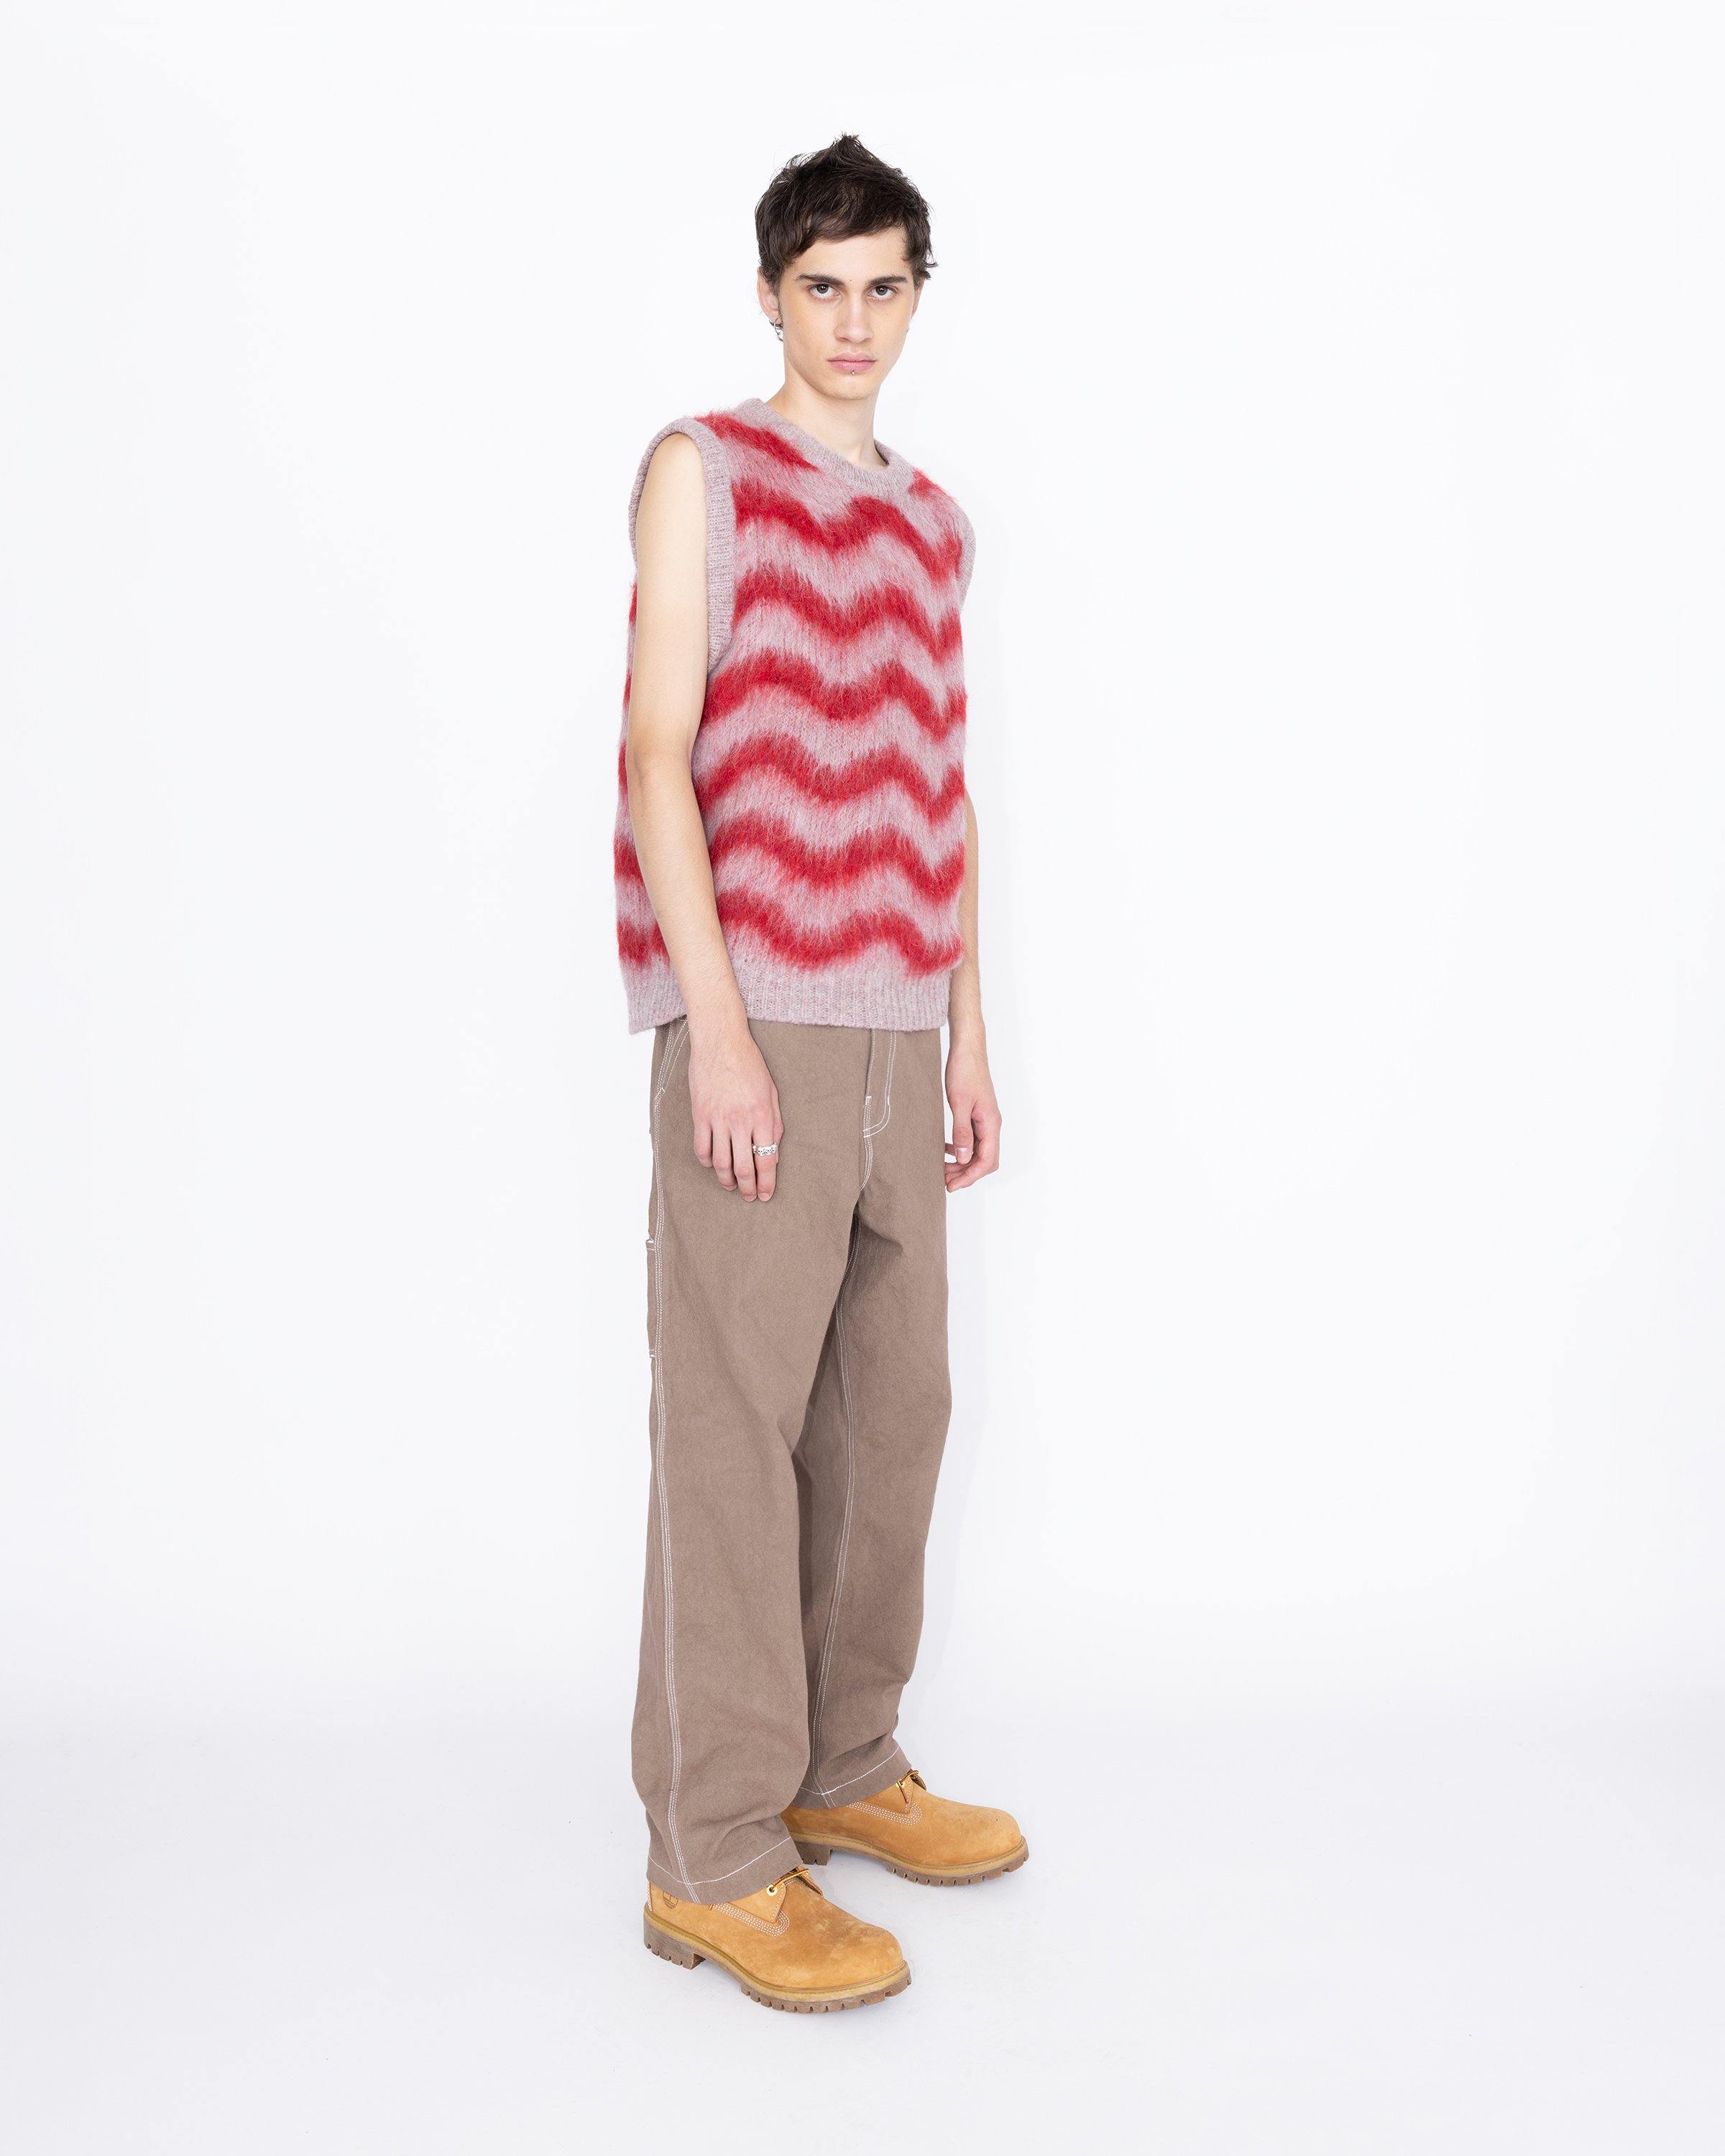 Highsnobiety HS05 - Alpaca Fuzzy Wave Sweater Vest Pale Rose/Red - Clothing - Multi - Image 4